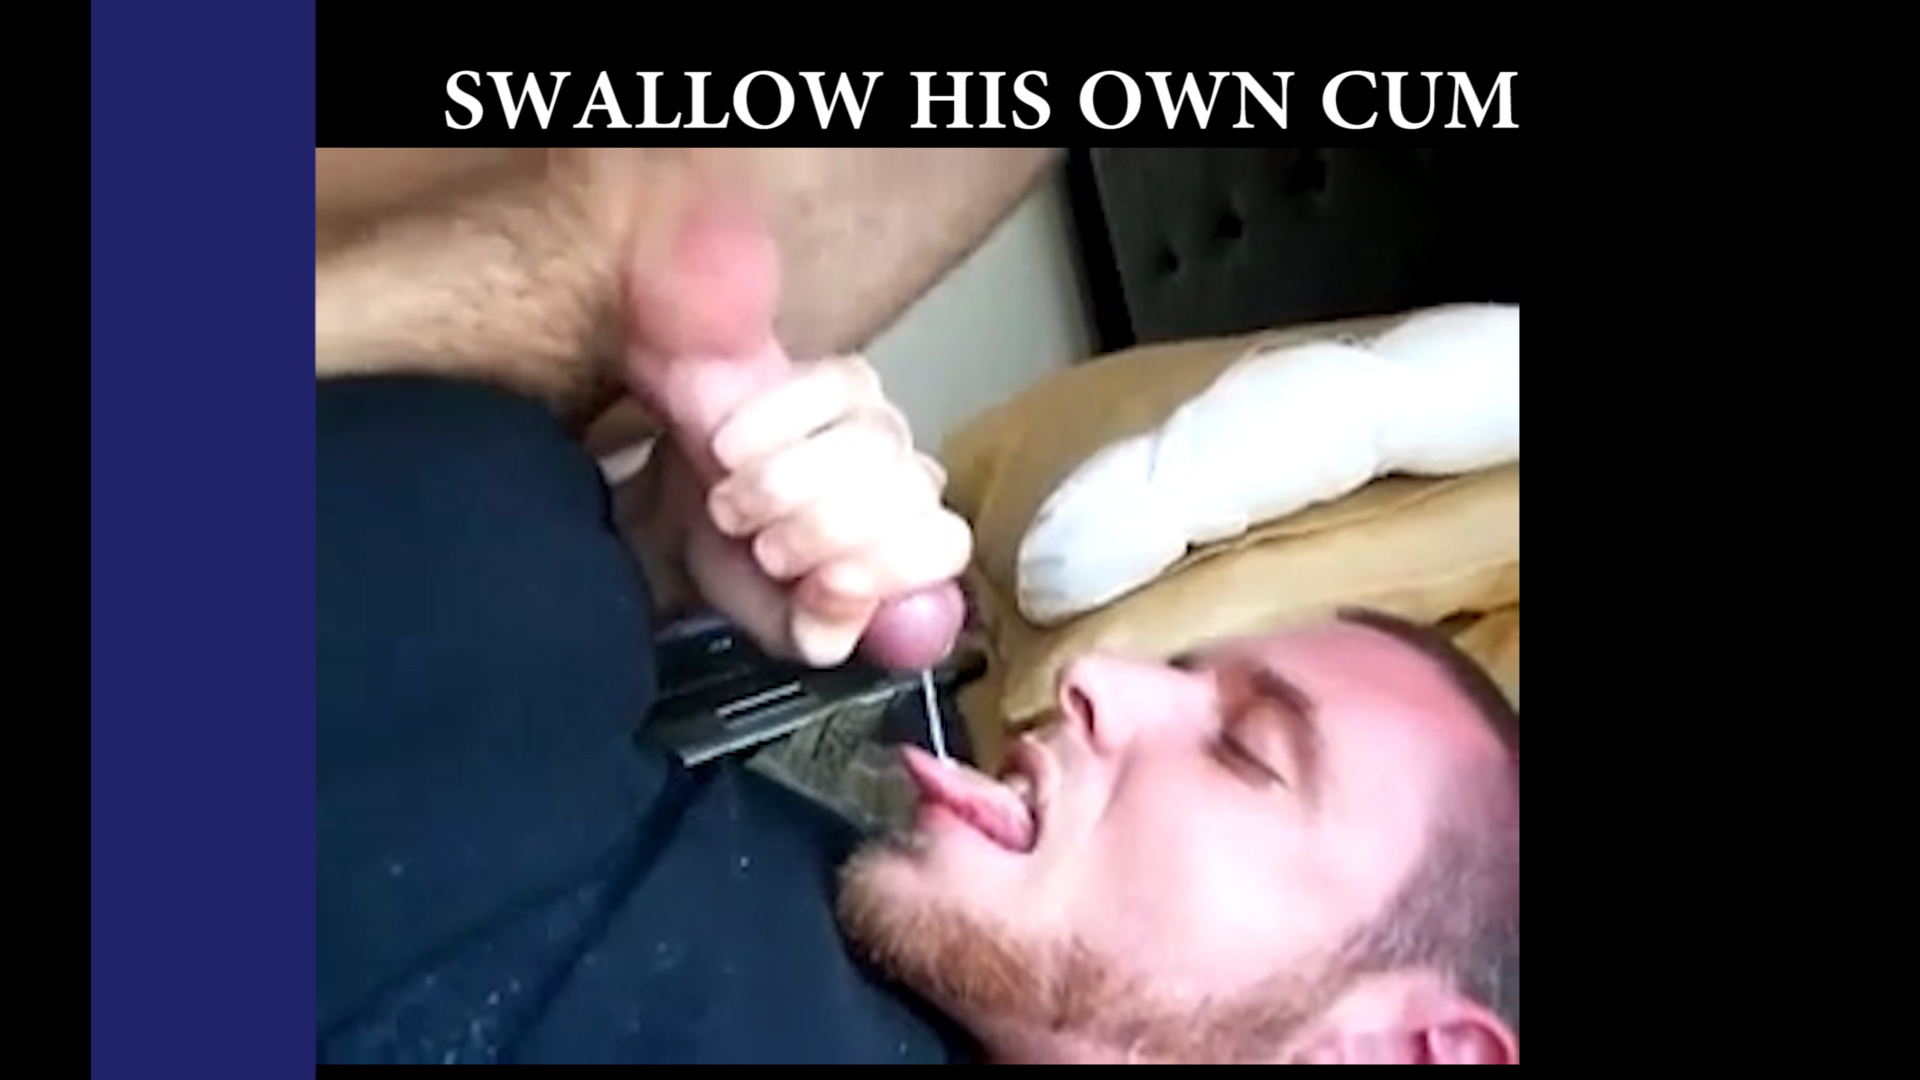 cherry place share guy swallows own cum photos